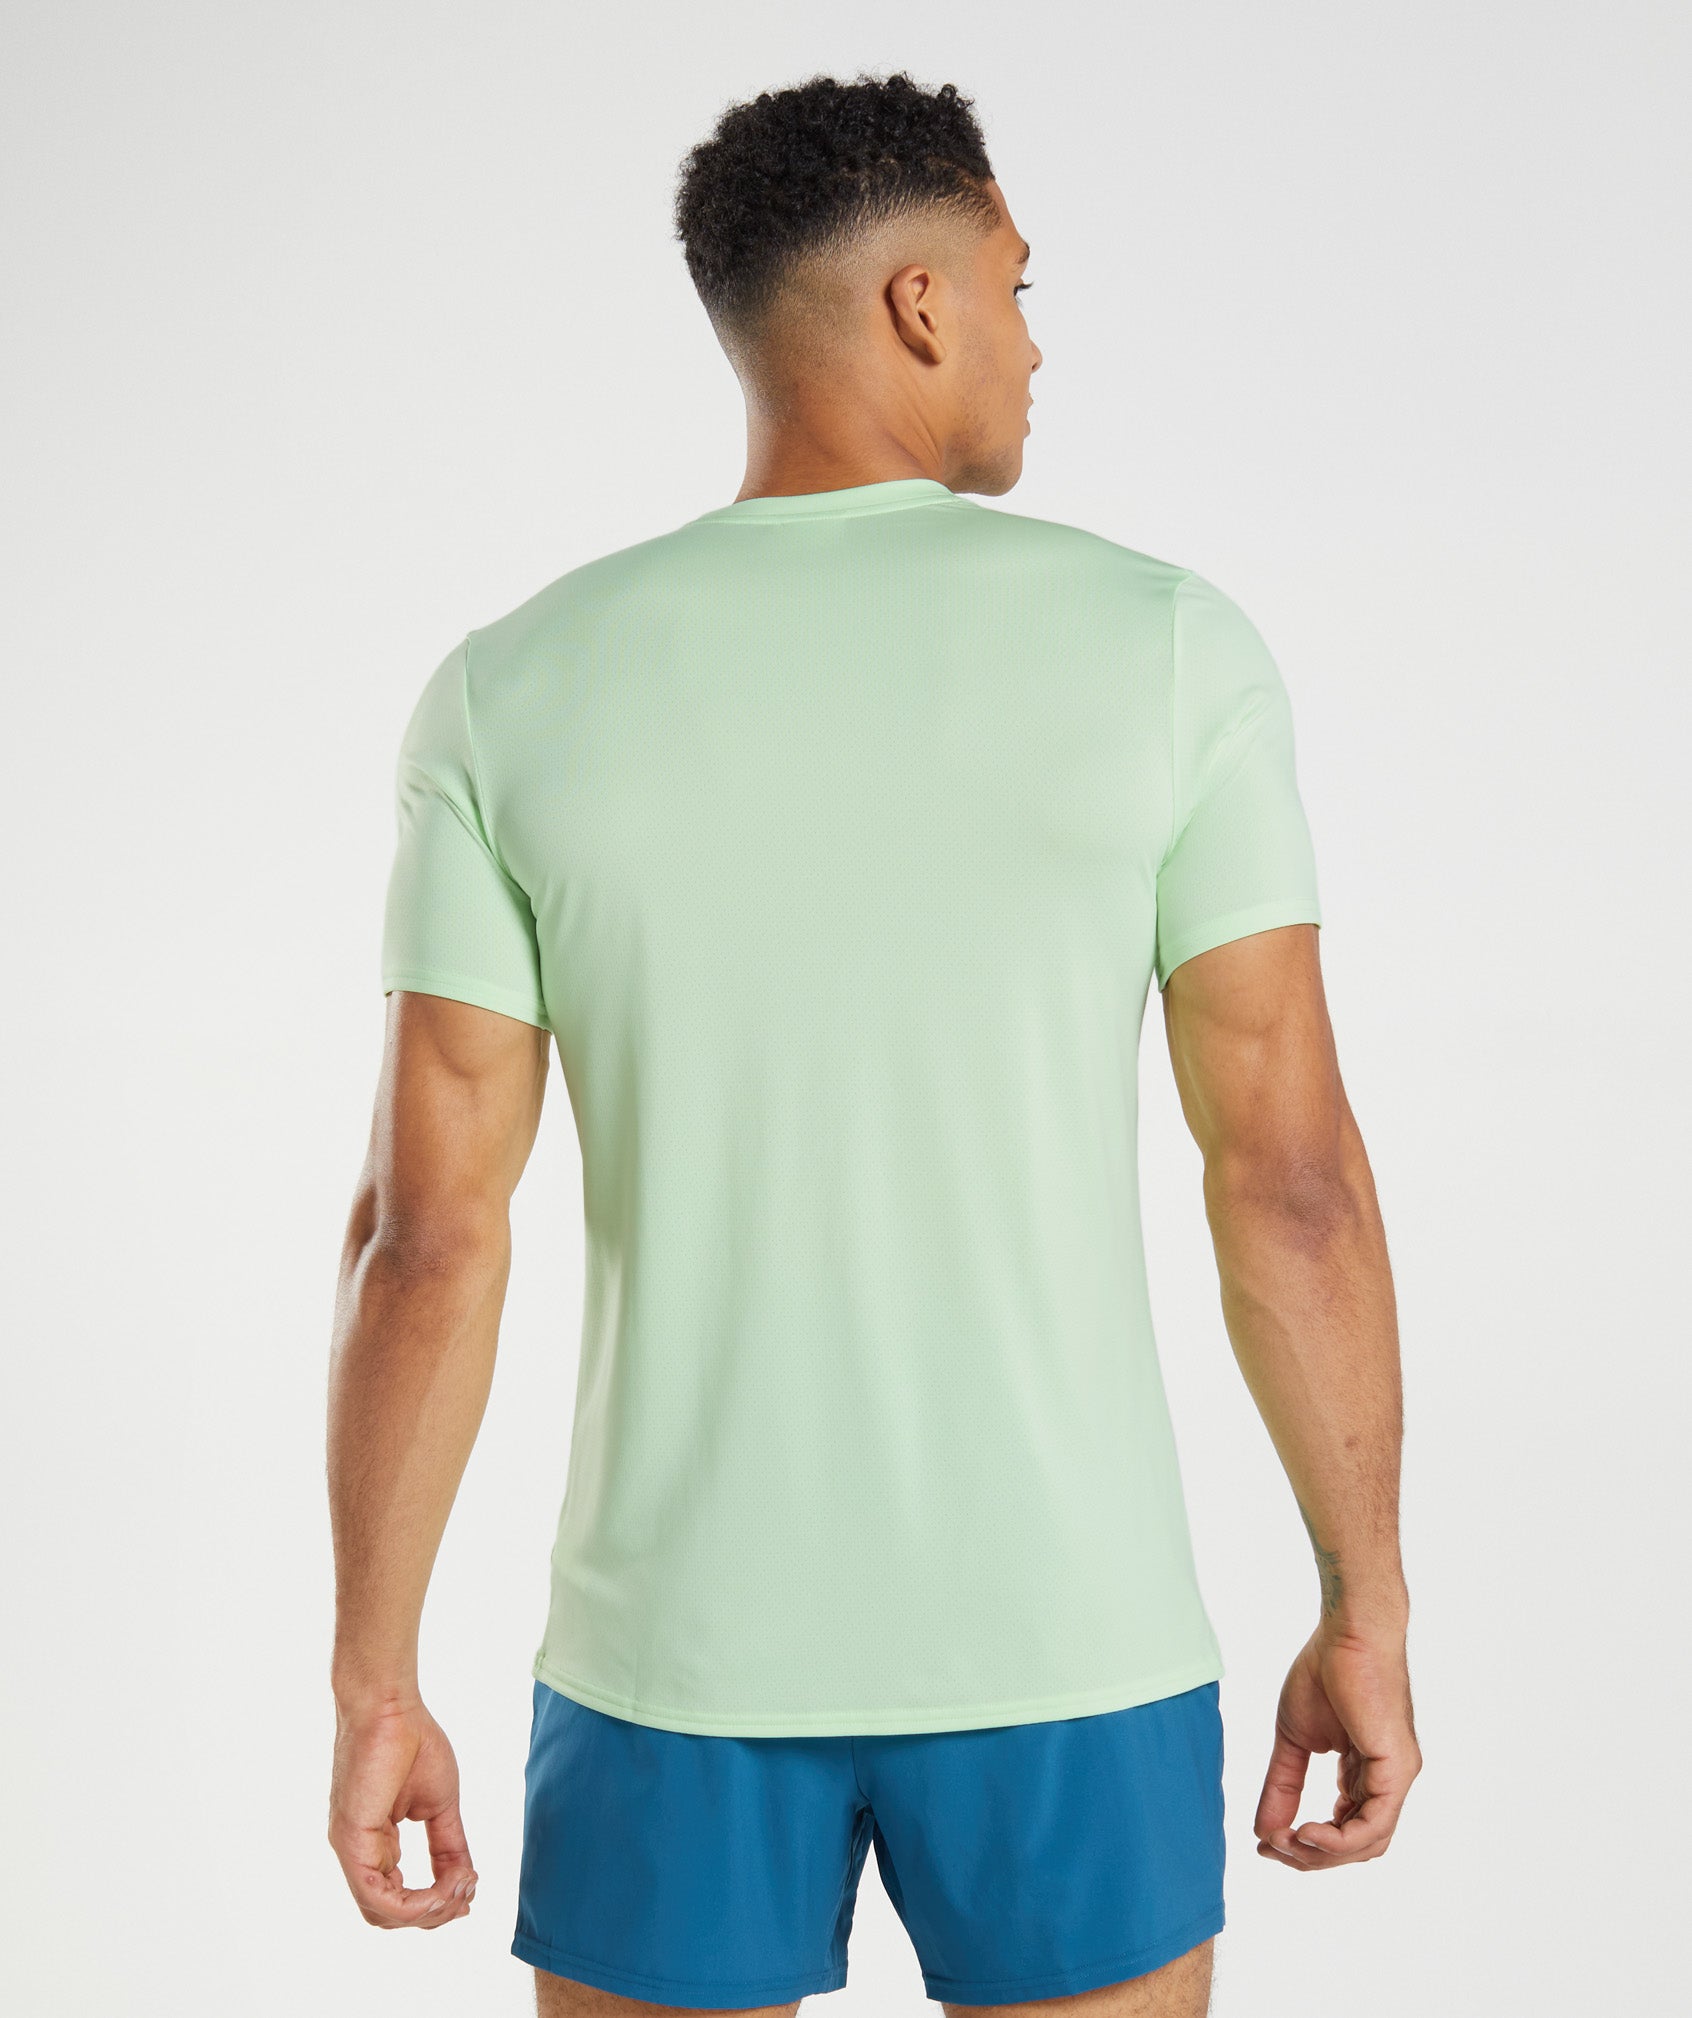 Arrival T-Shirt in Fluo Mint - view 2